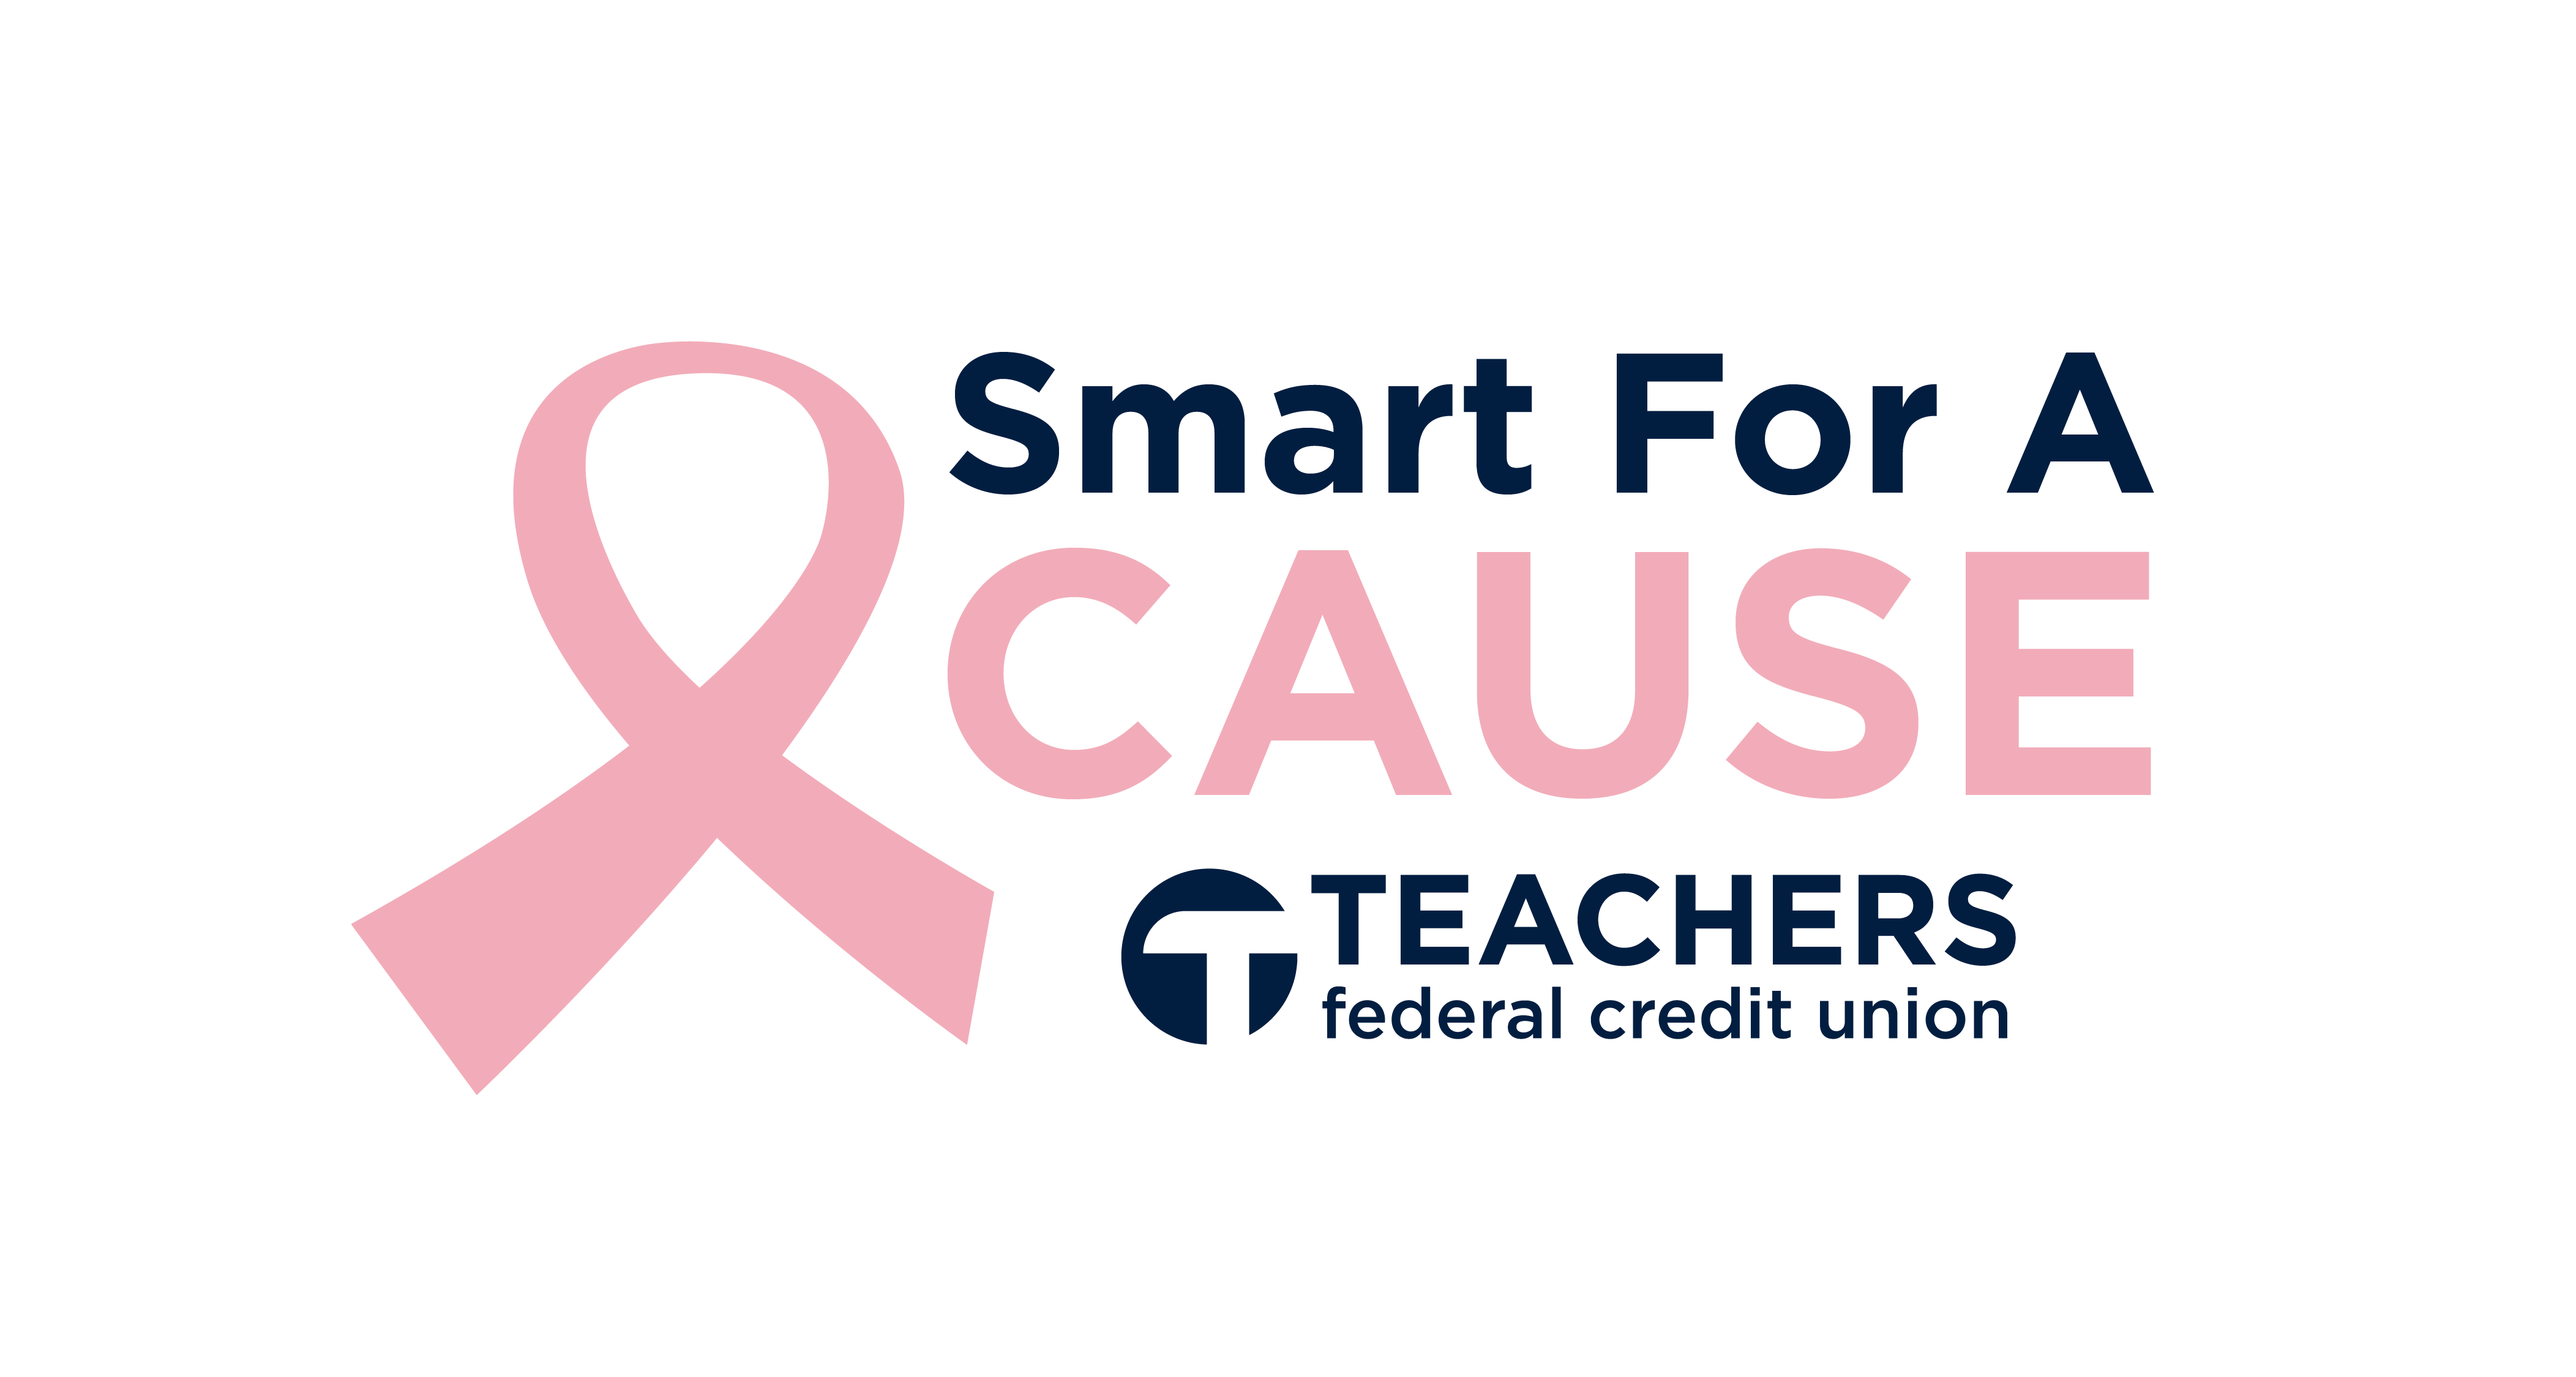 Smart For A Cause